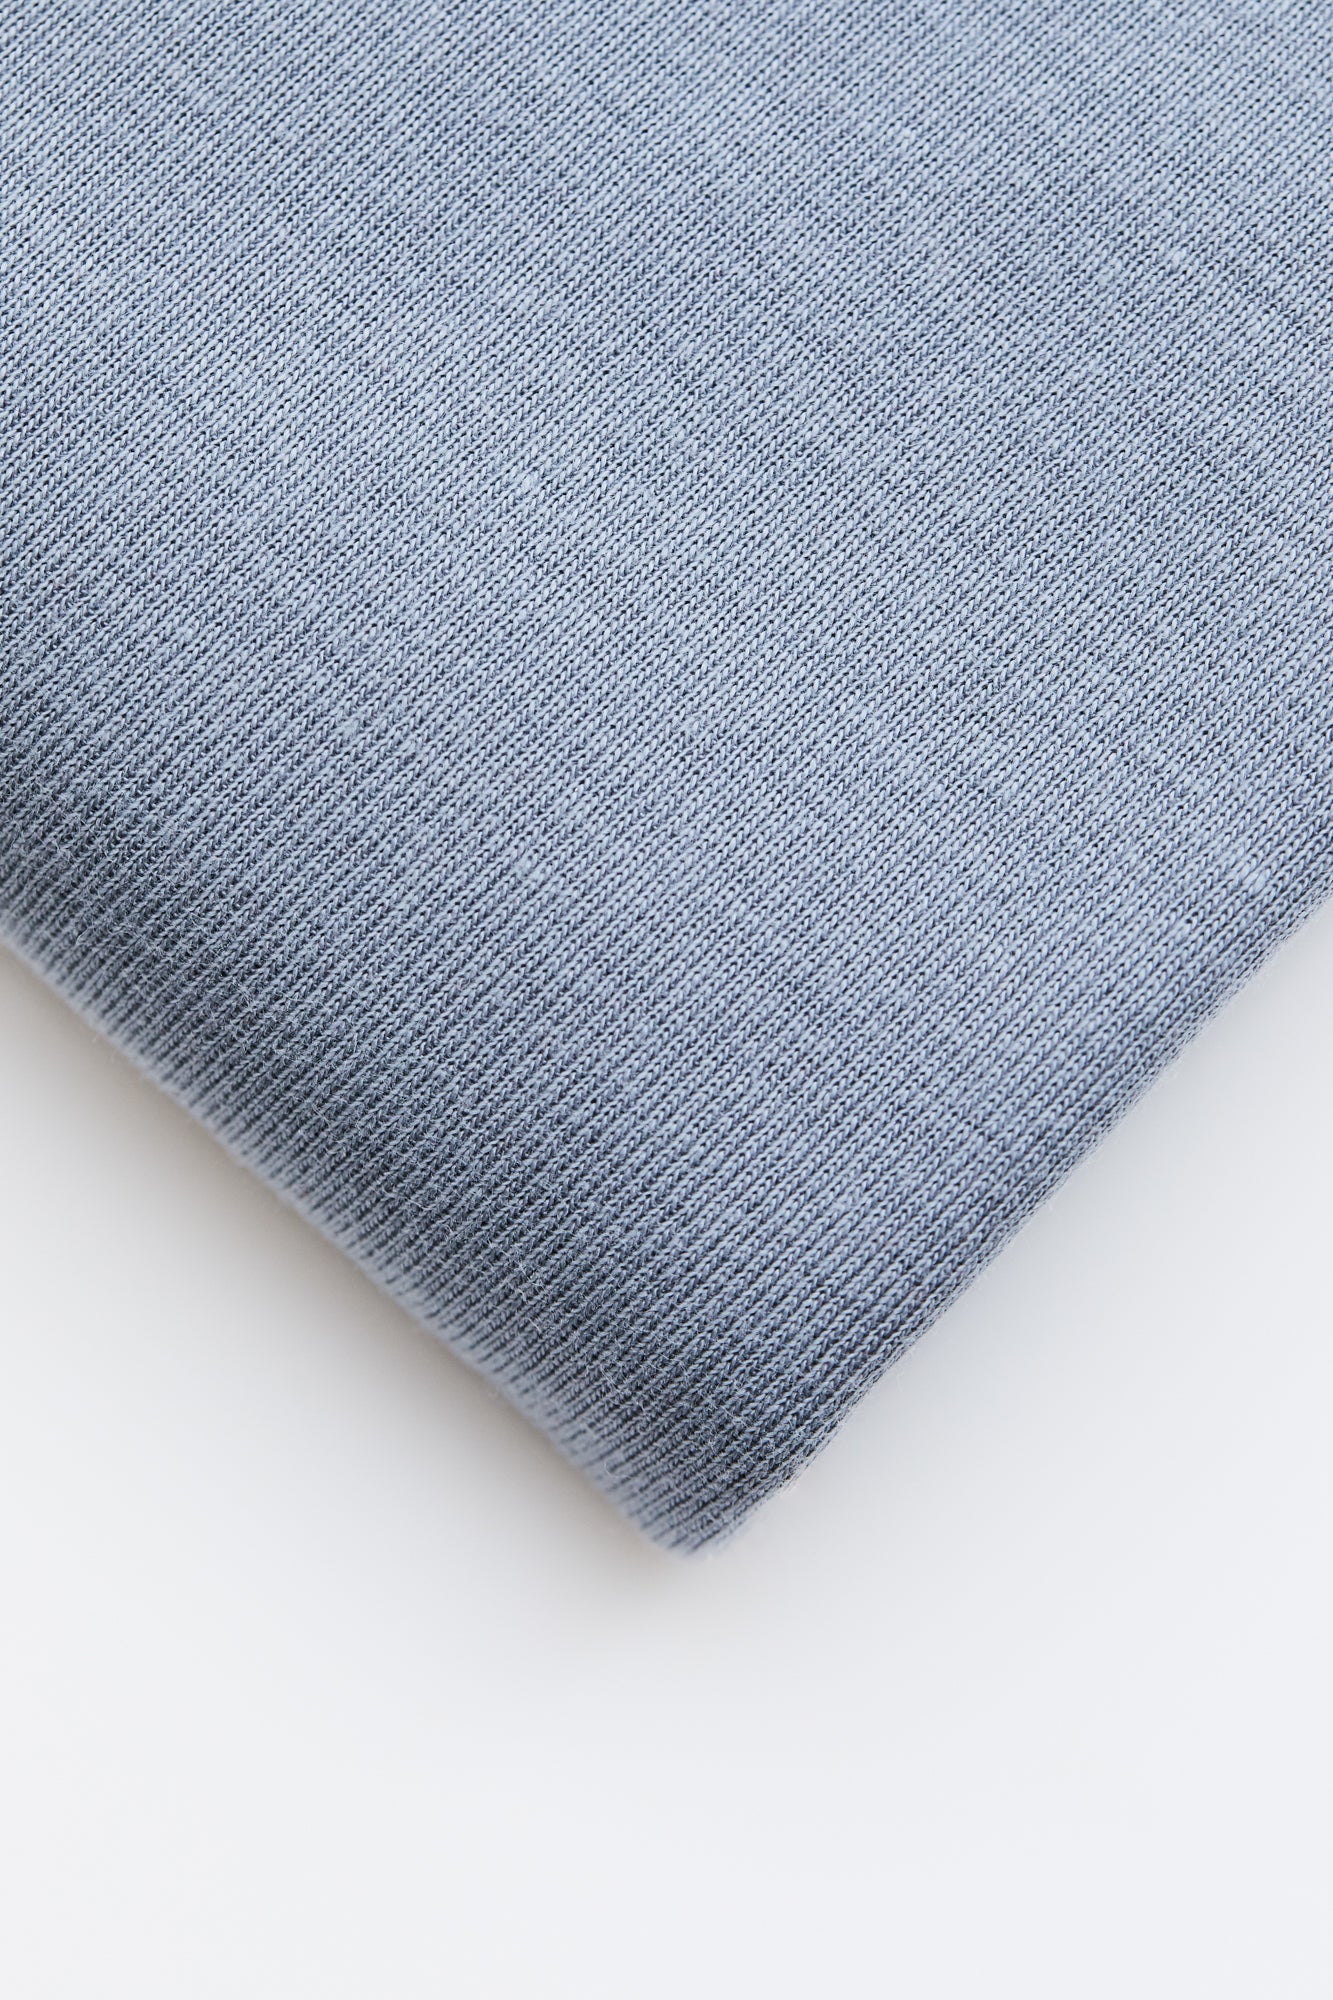 Close up of sky blue organic cotton and tencel knit sewing fabric